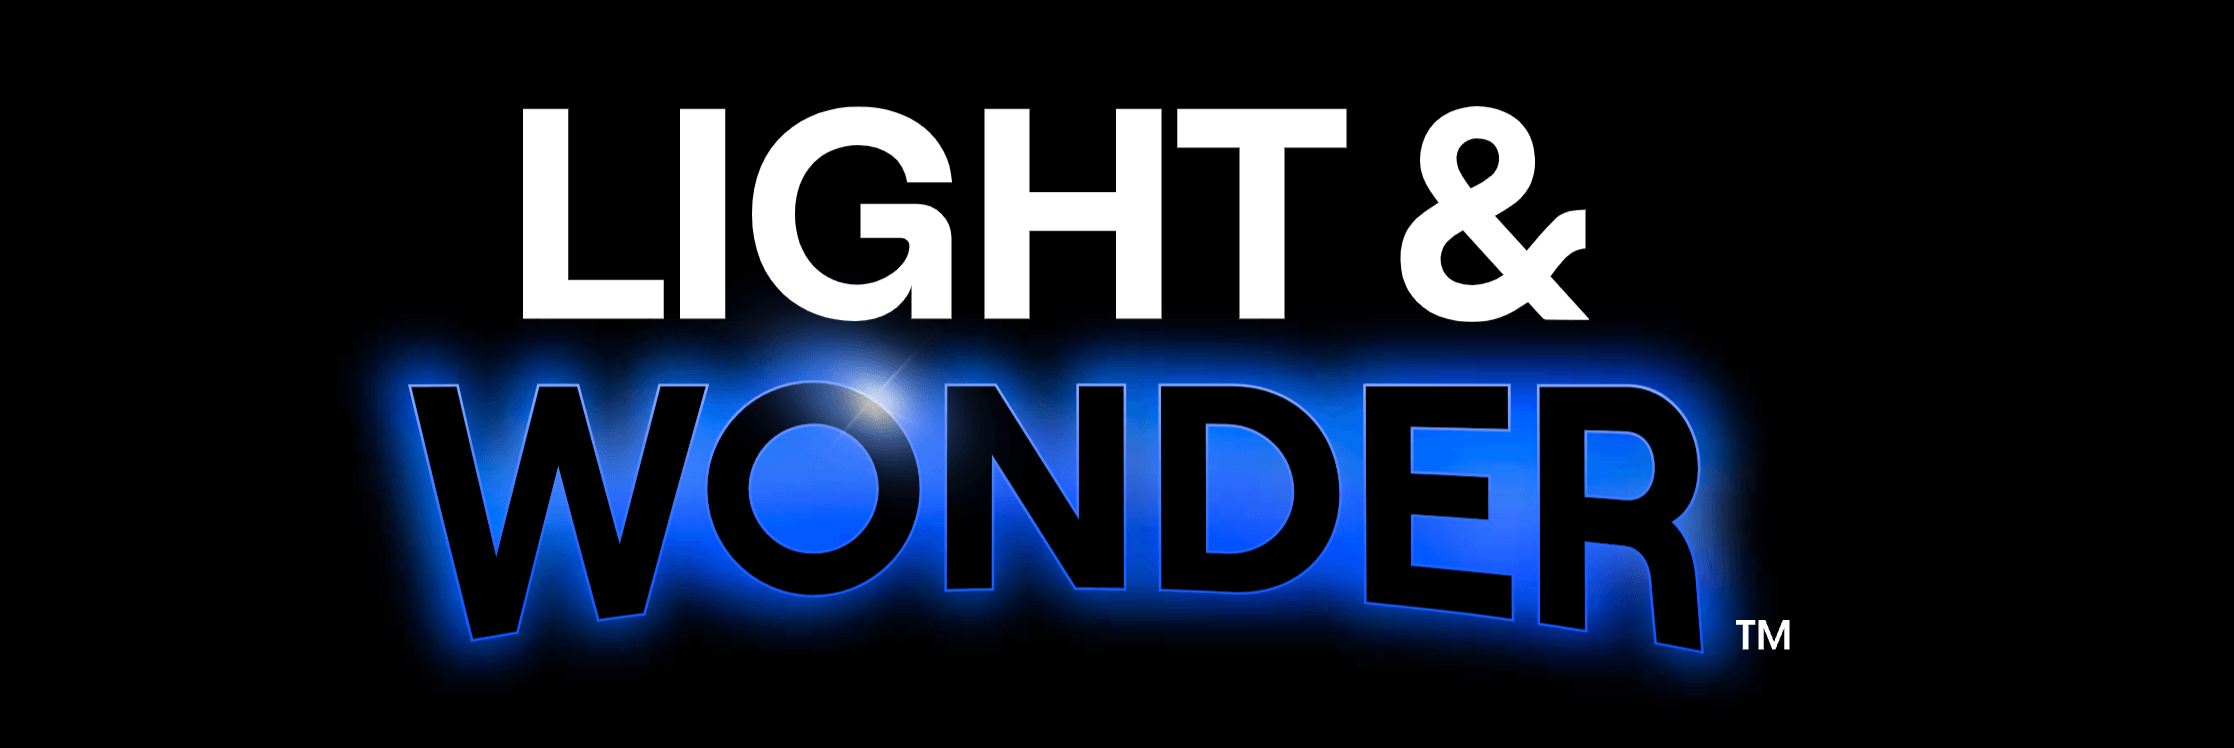 Light & Wonder to offer $422m for remaining SciPlay shares